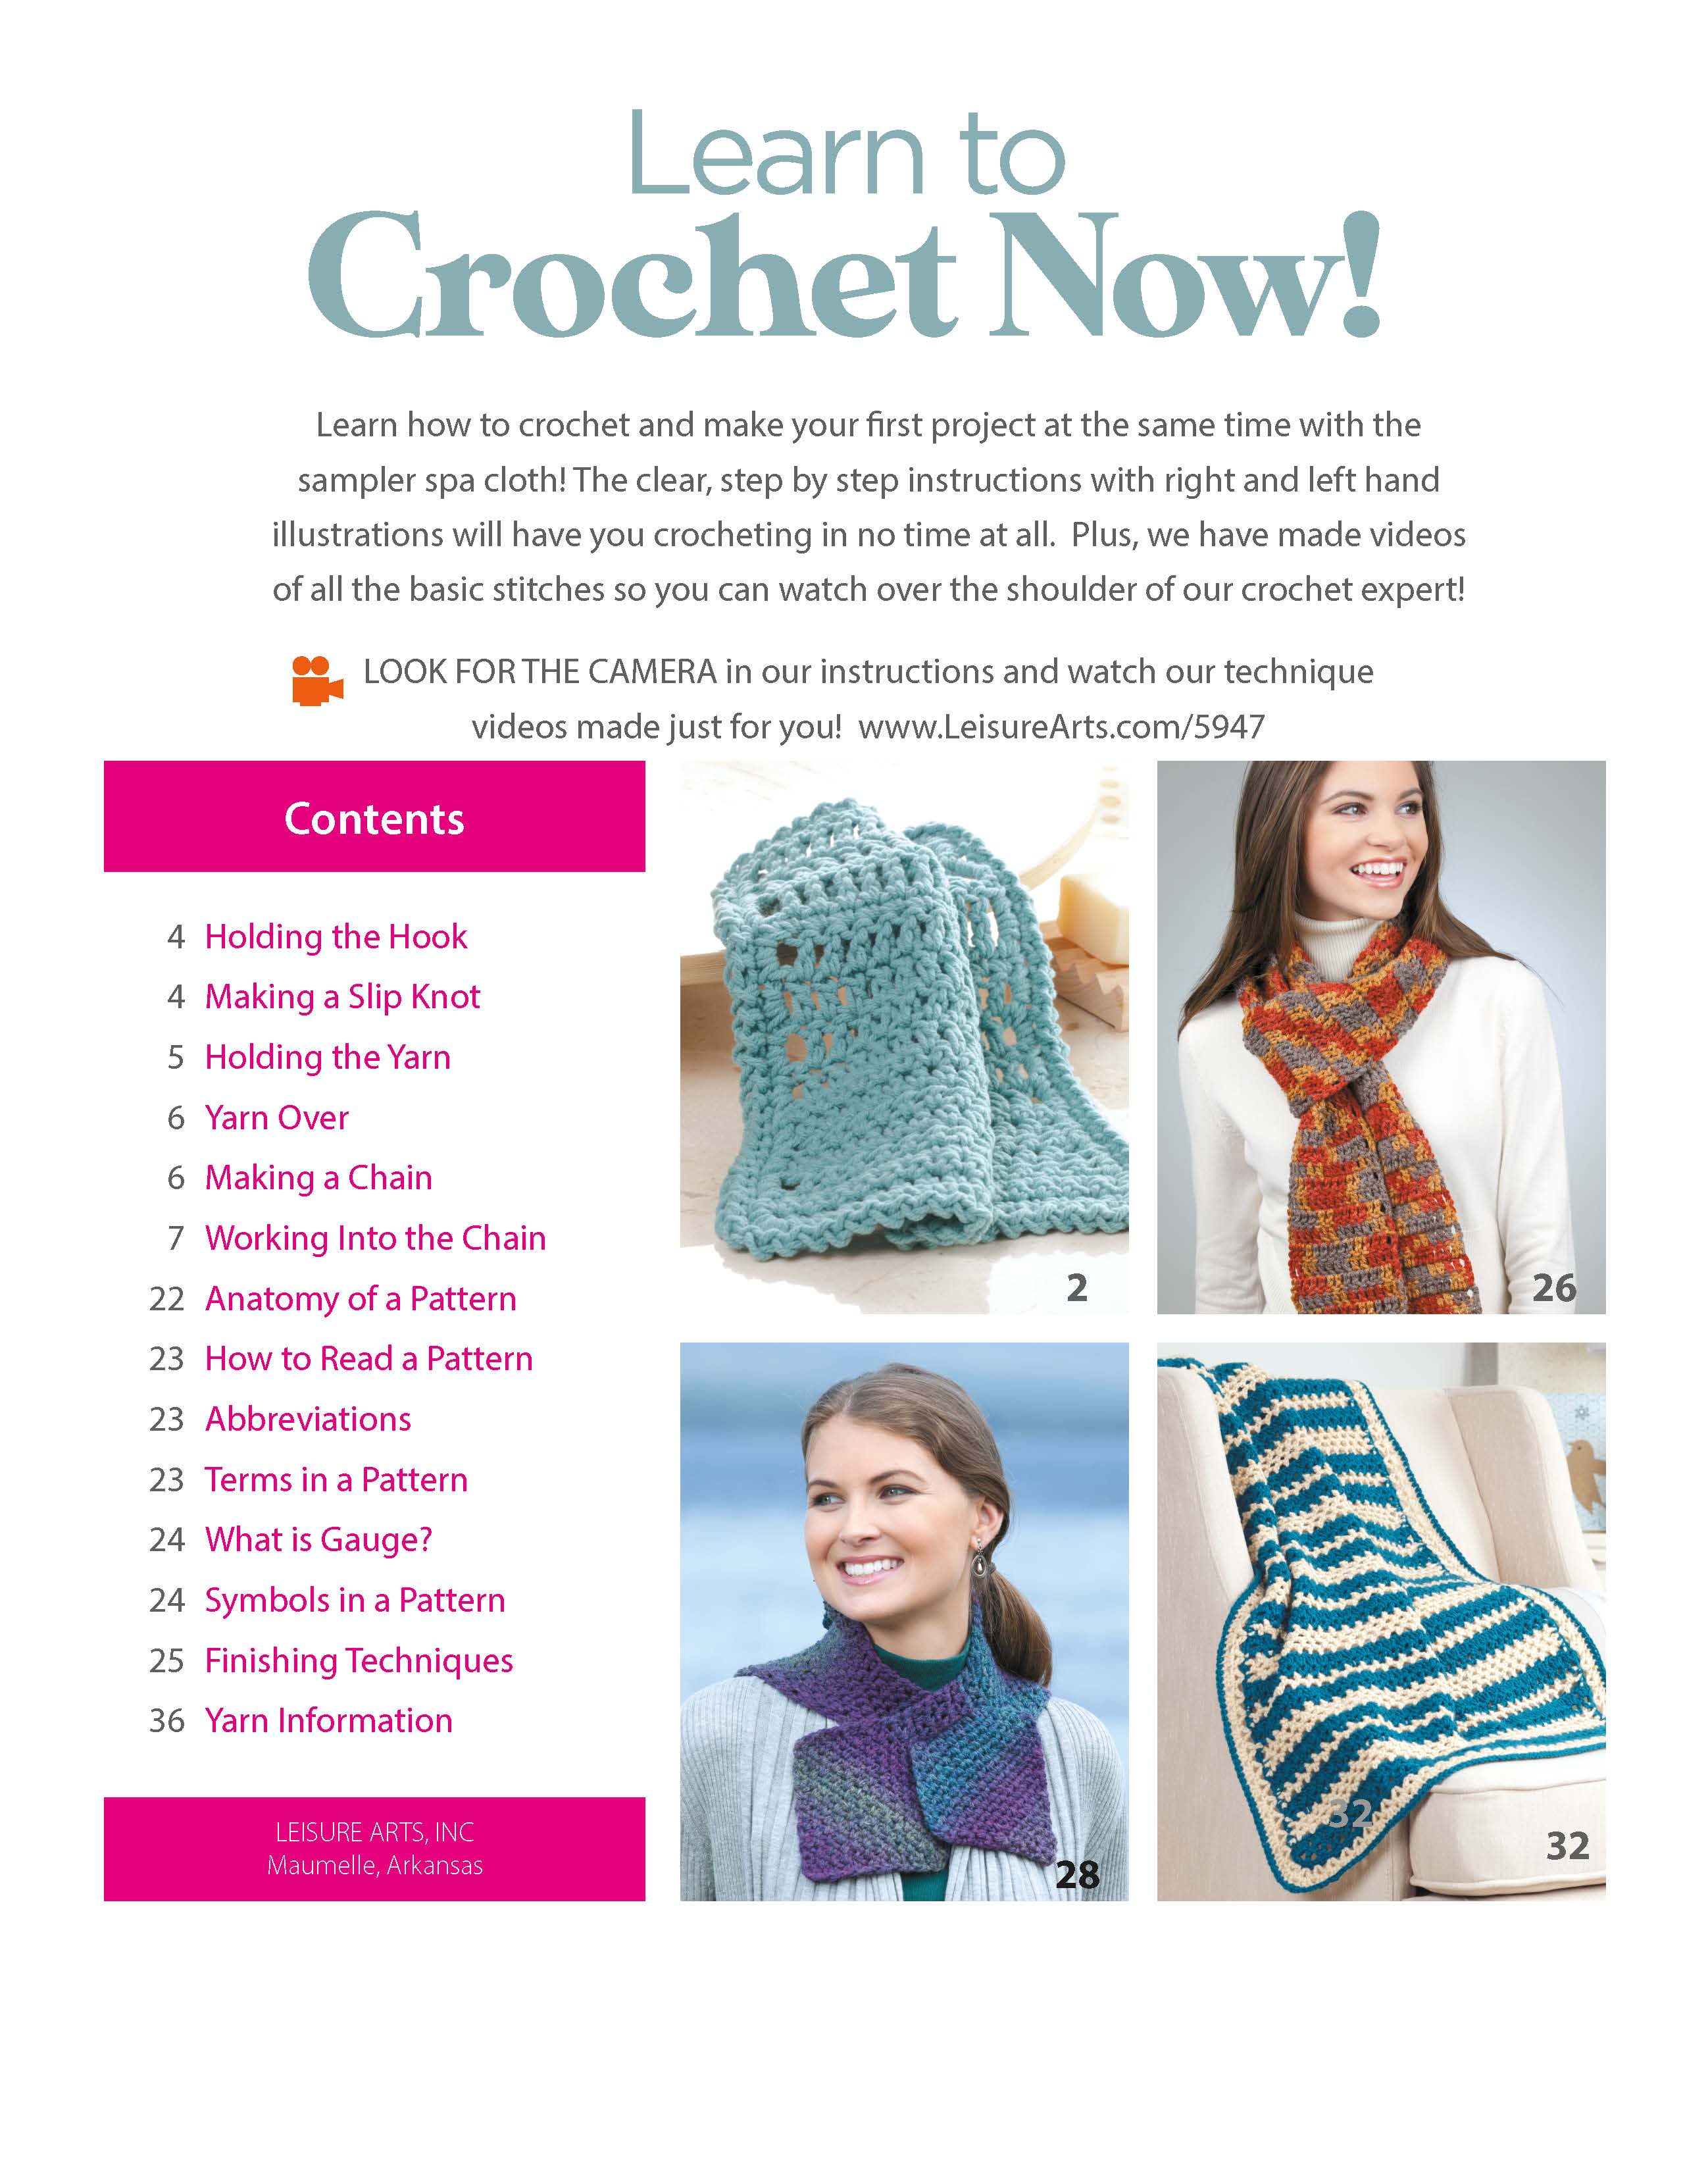 Learn to Crochet: All About Yarn